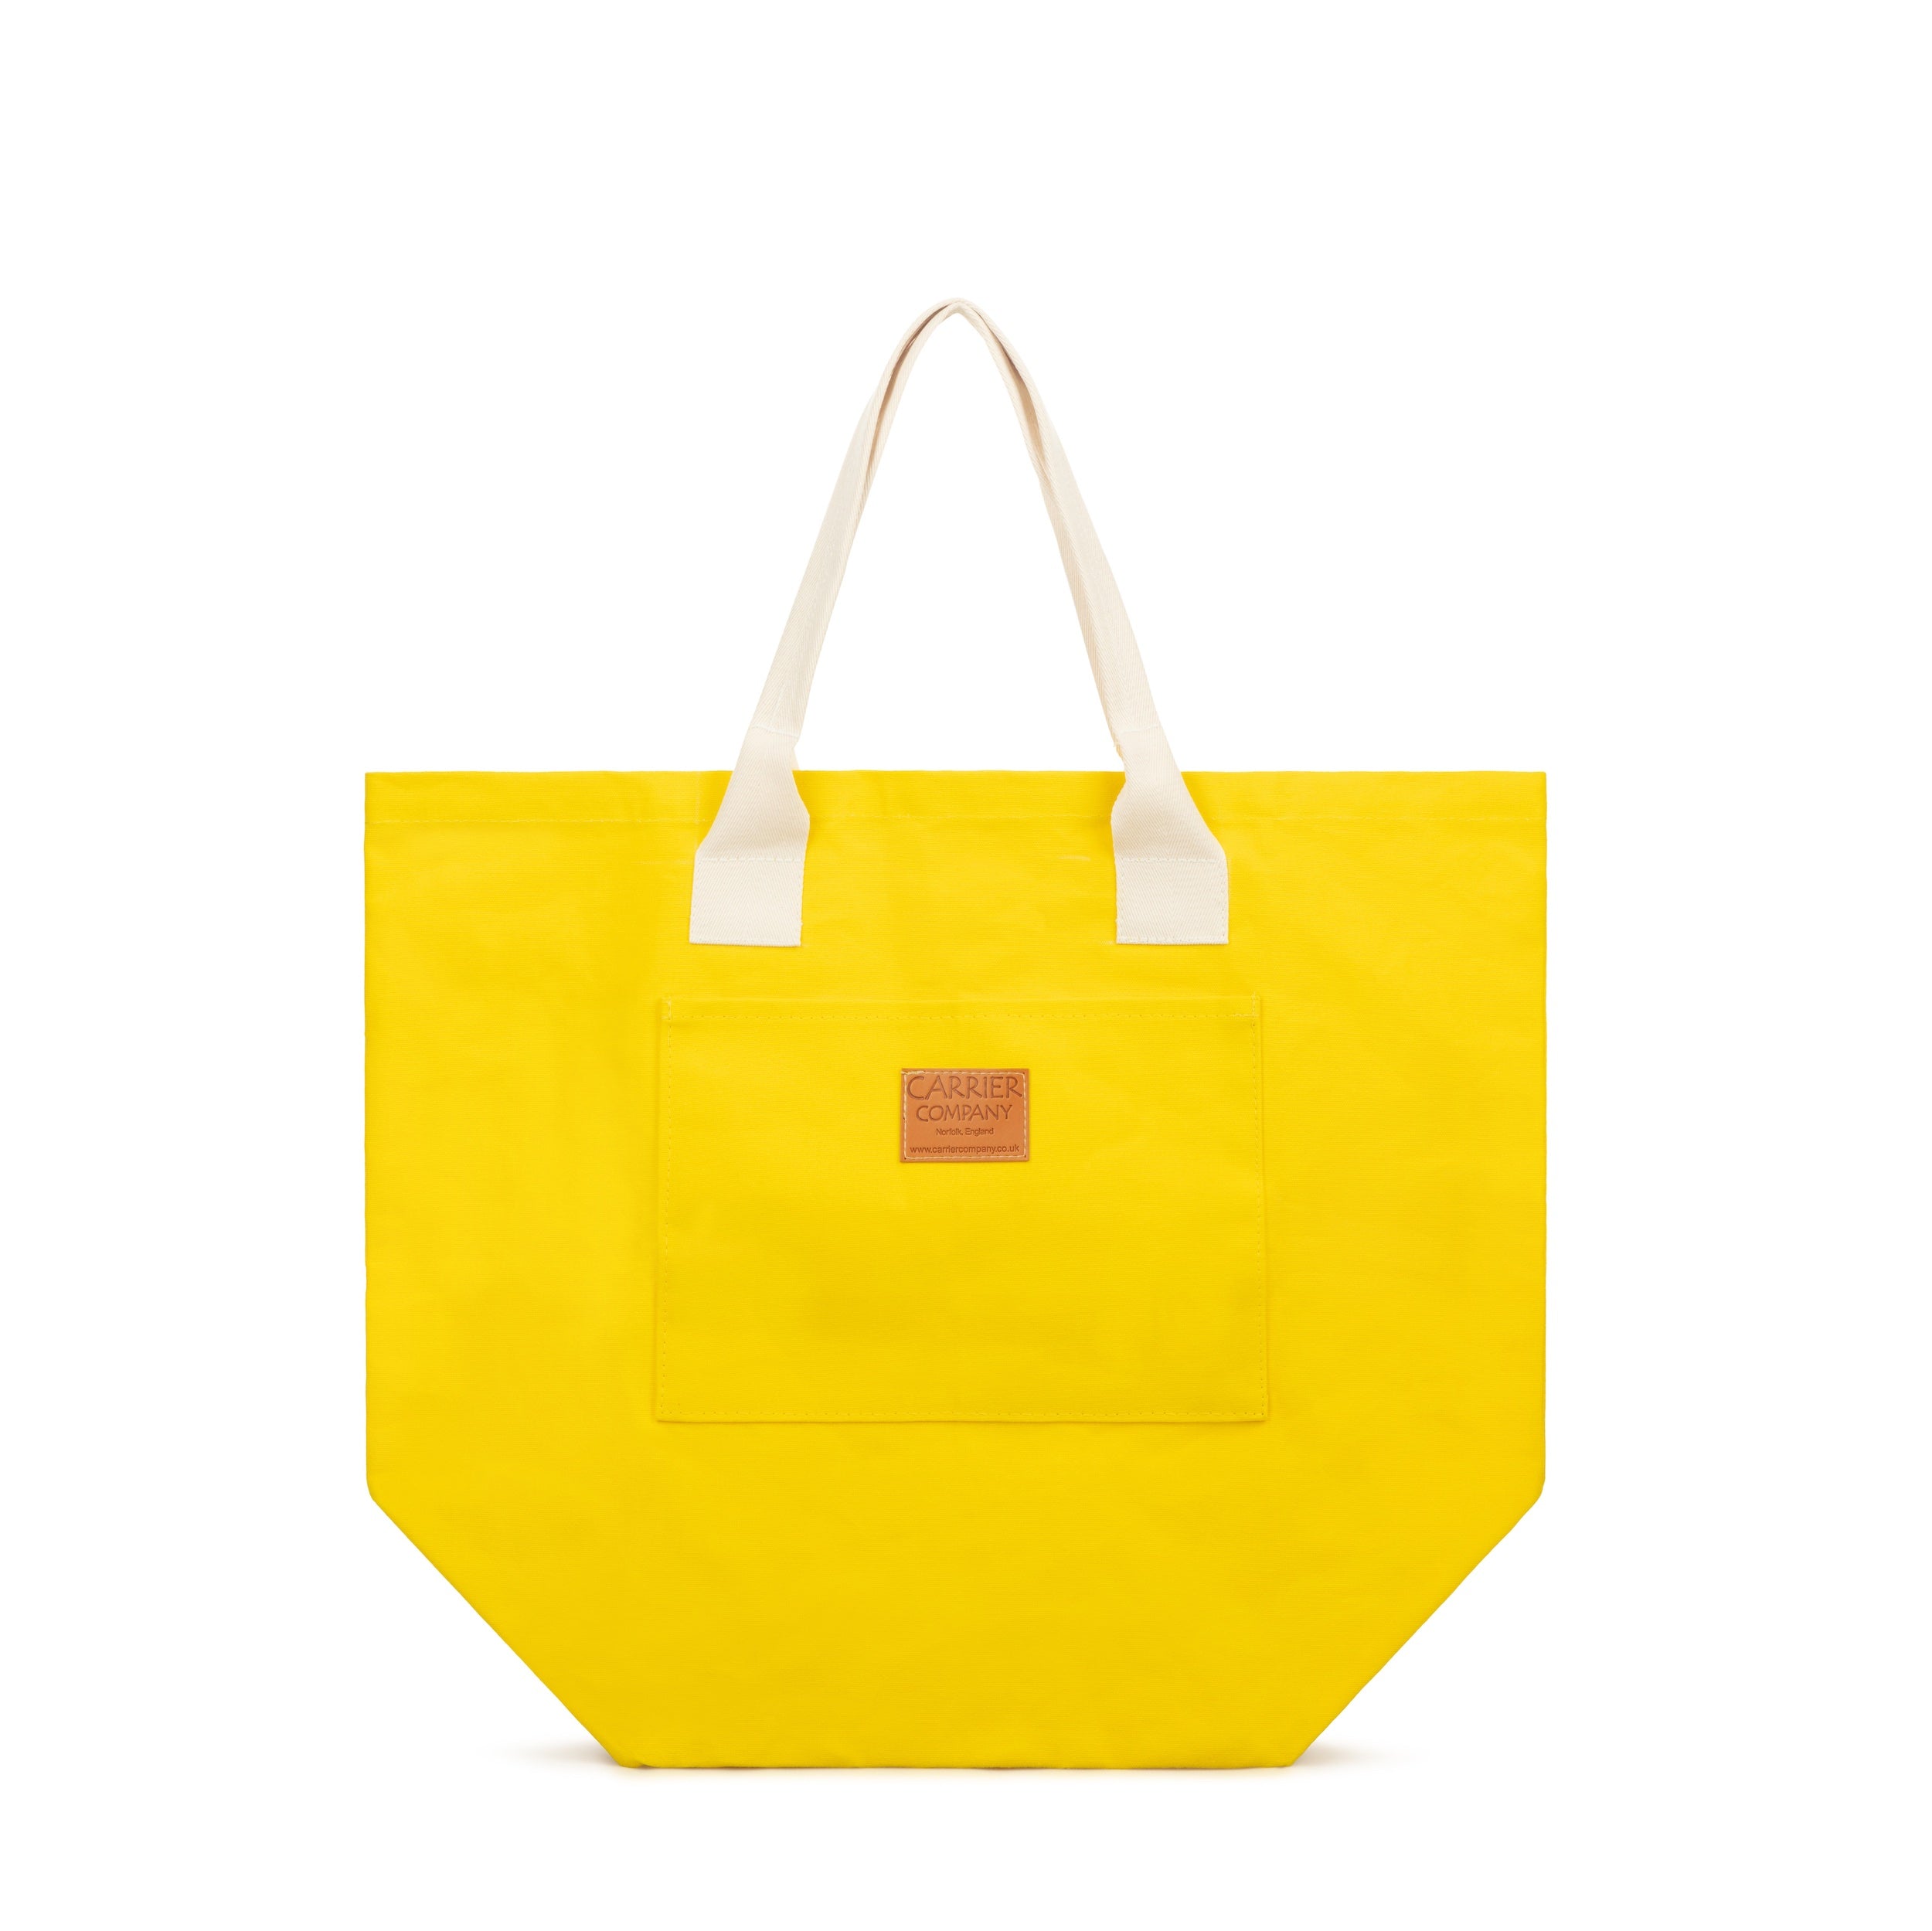 Carrier Company White Handled Beach Bag in Yellow